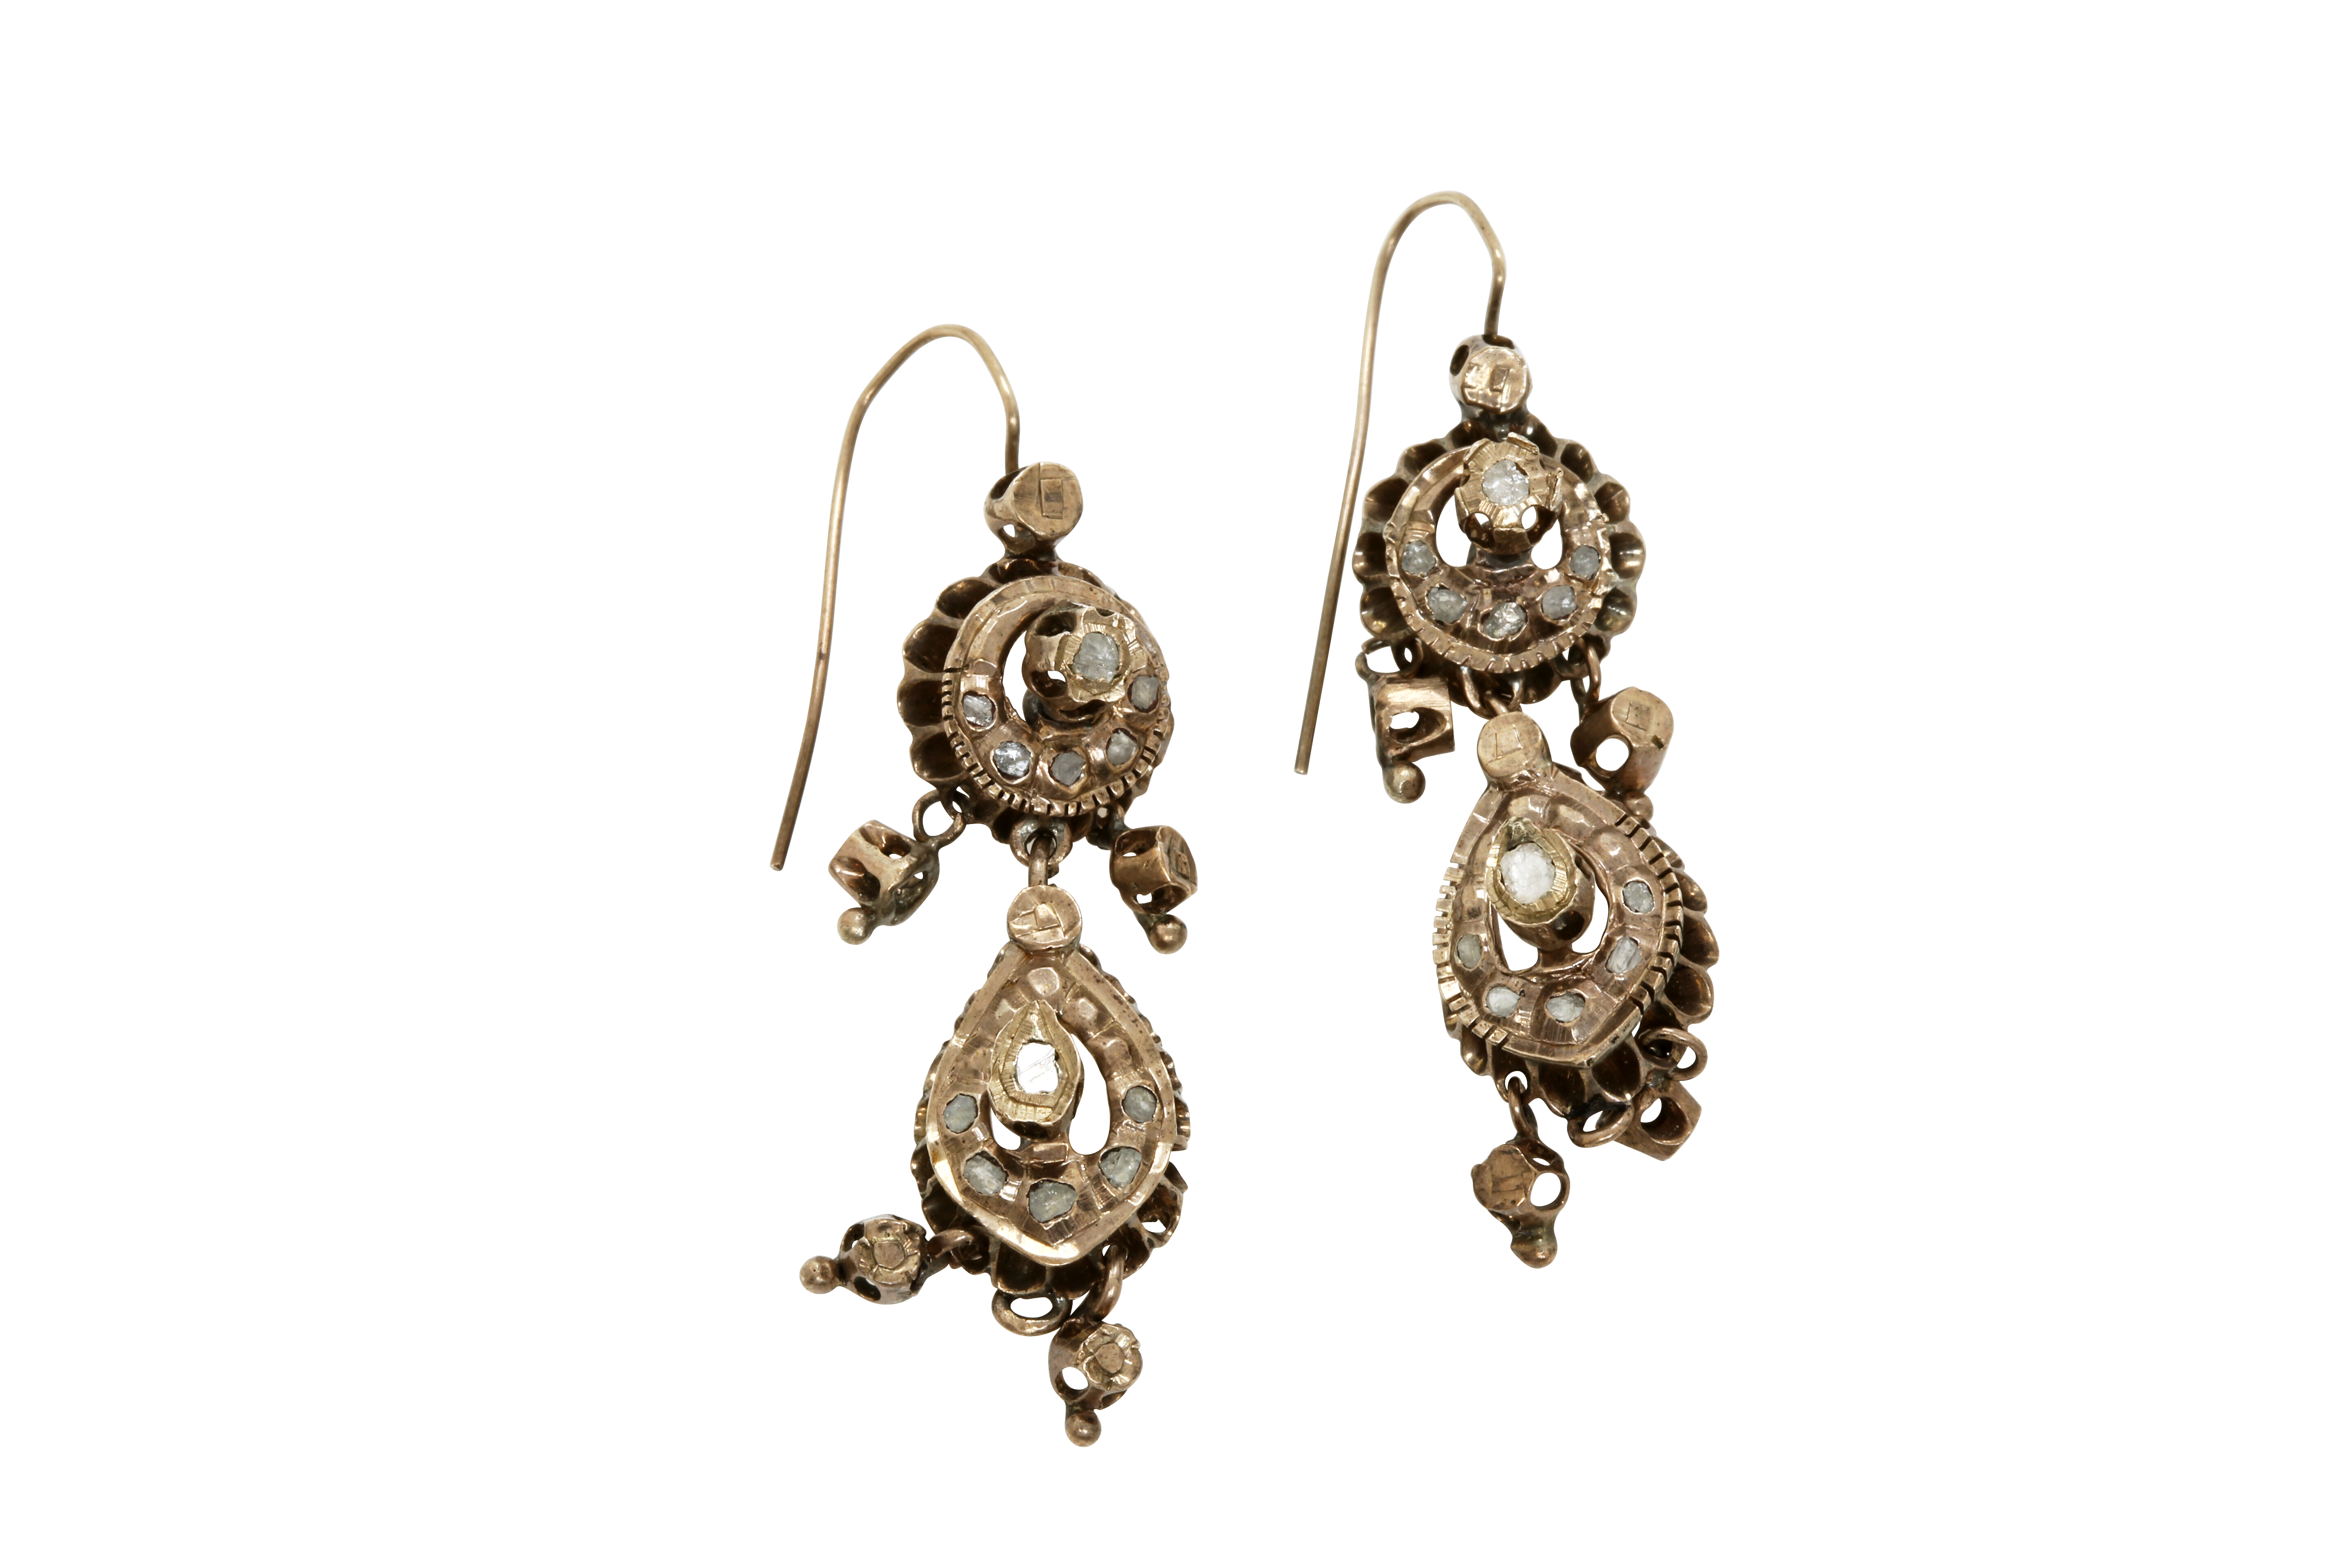 A pair of late 19th century Constantinople gold earrings with diamonds. Approx: 11 gr